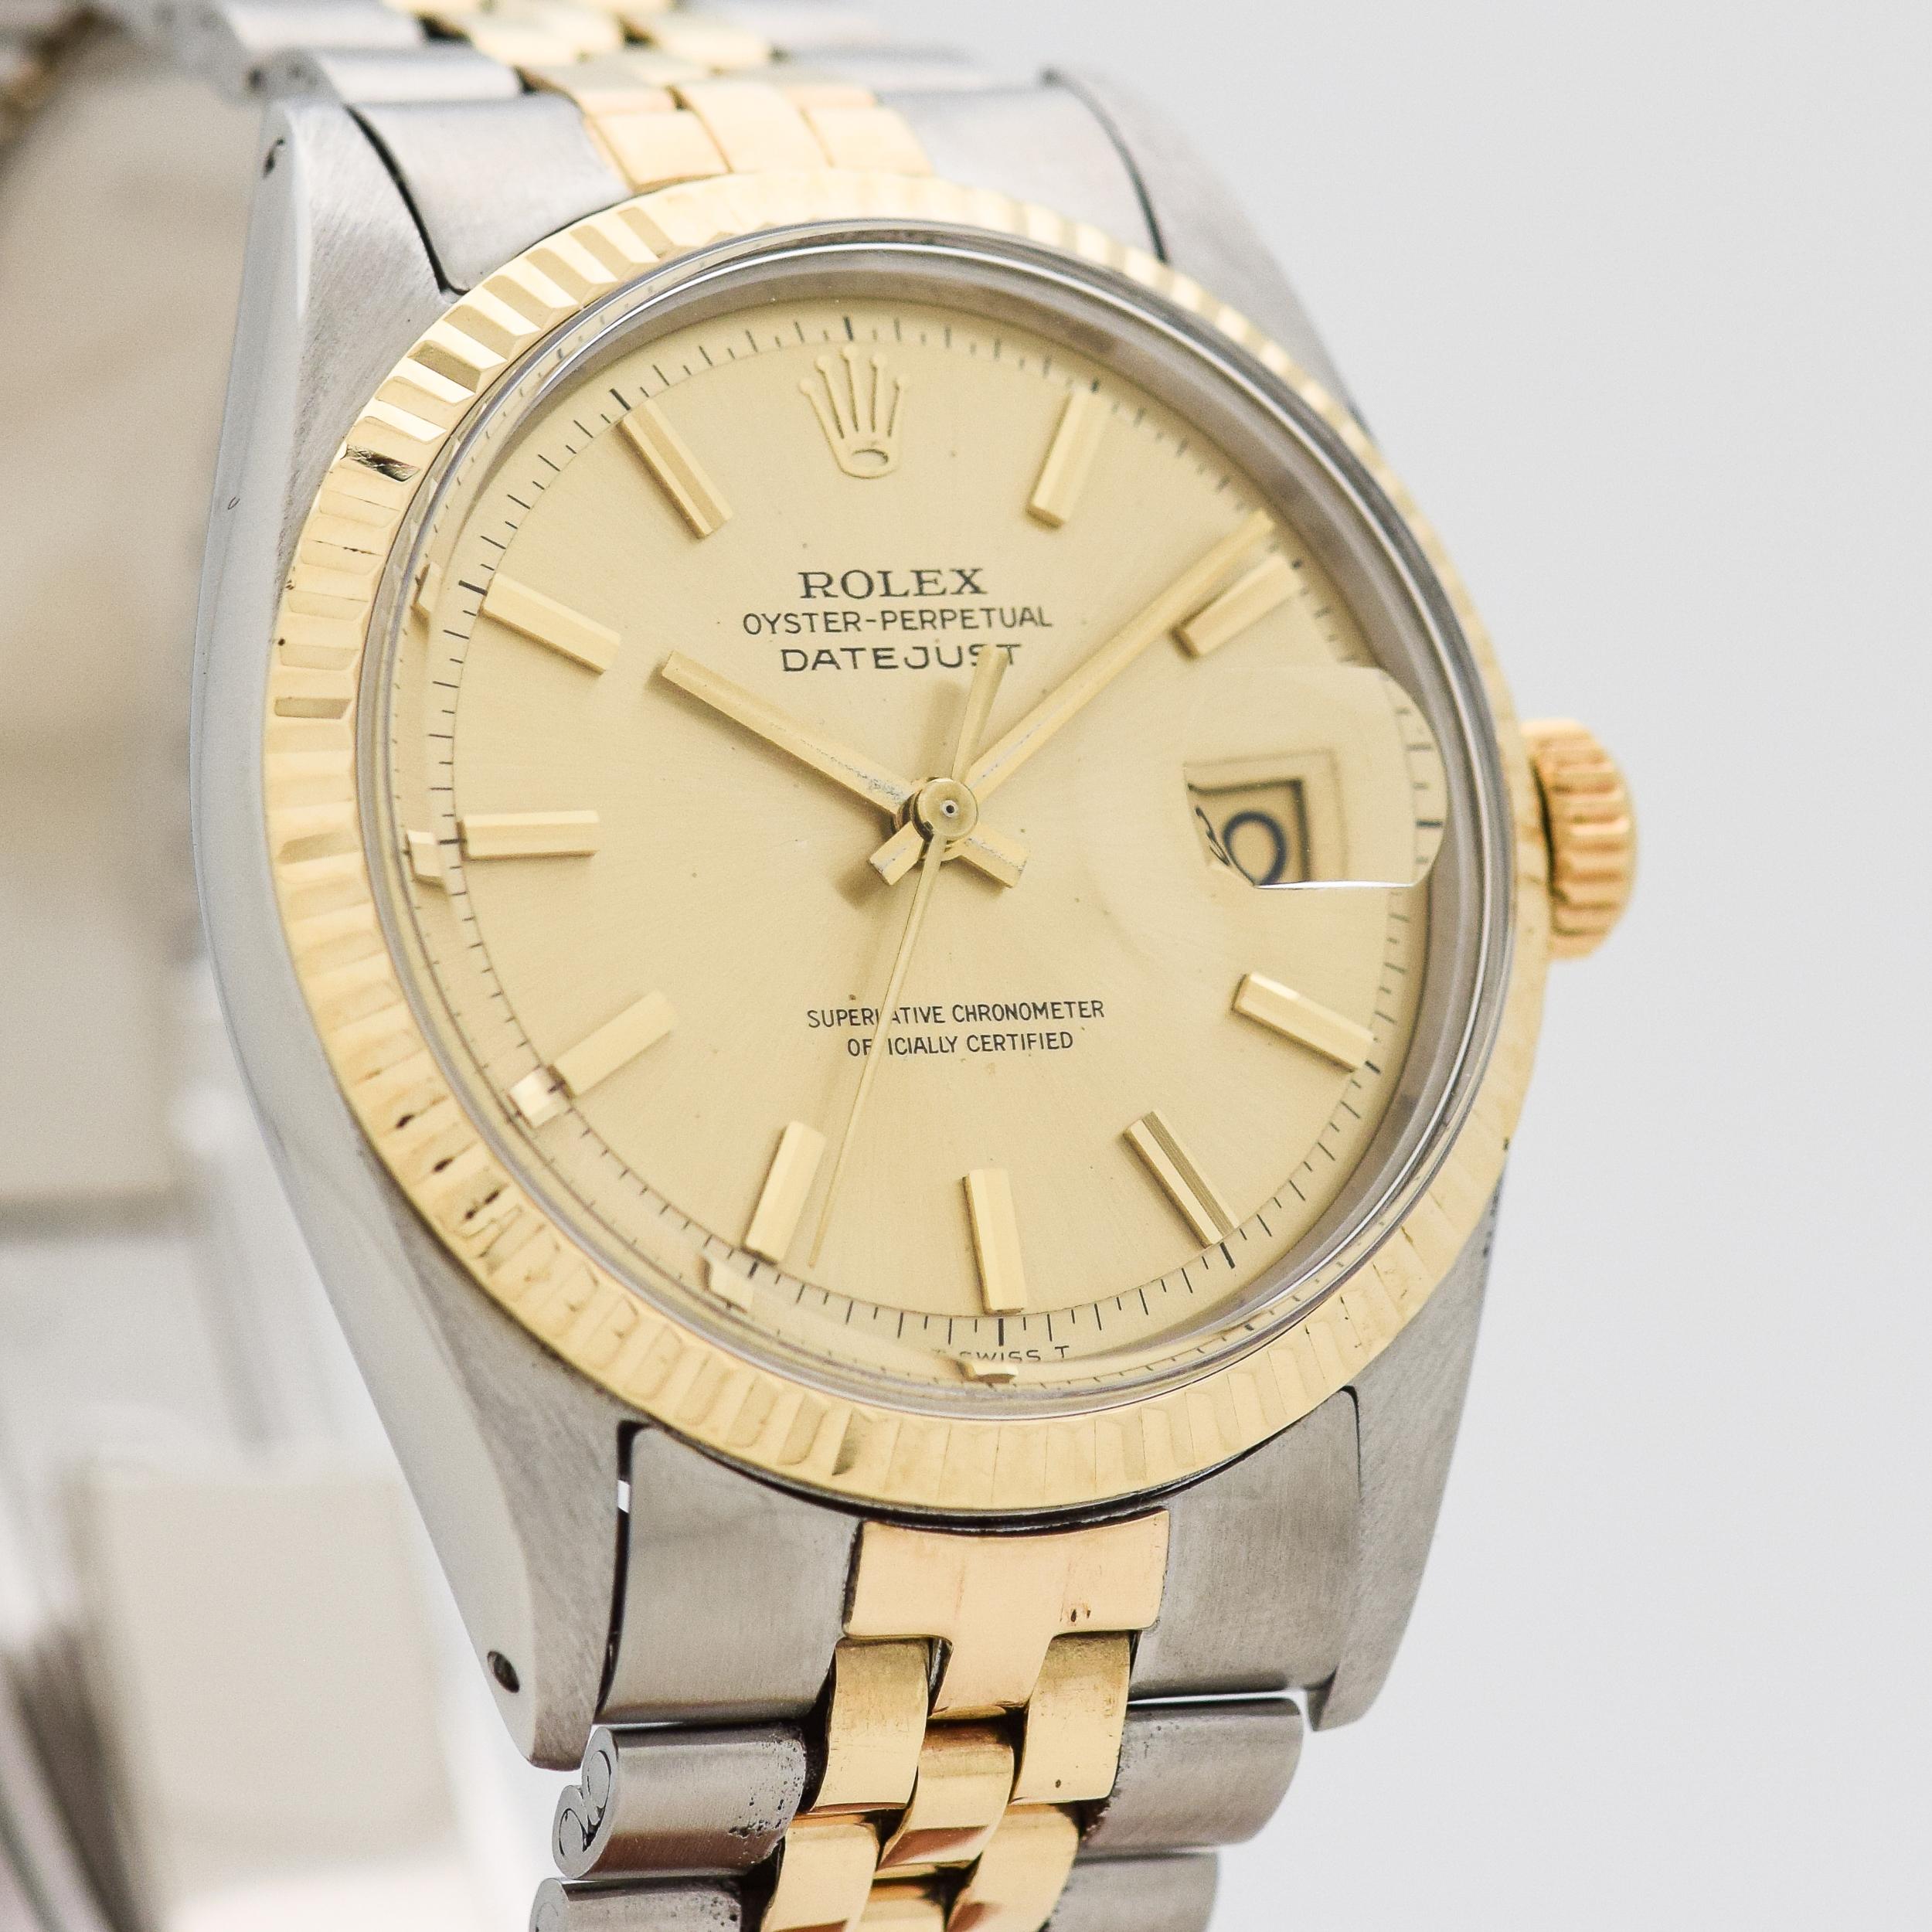 1967 Vintage Rolex Datejust Ref. 1601 Two Tone 14k Yellow Gold and Stainless Steel watch with Original Champagne Dial with Applied Gold Color Beveled Stick/Bar/Baton Markers with Original Rolex Two Tone 14k Yellow Gold and Stainless Steel Jubilee